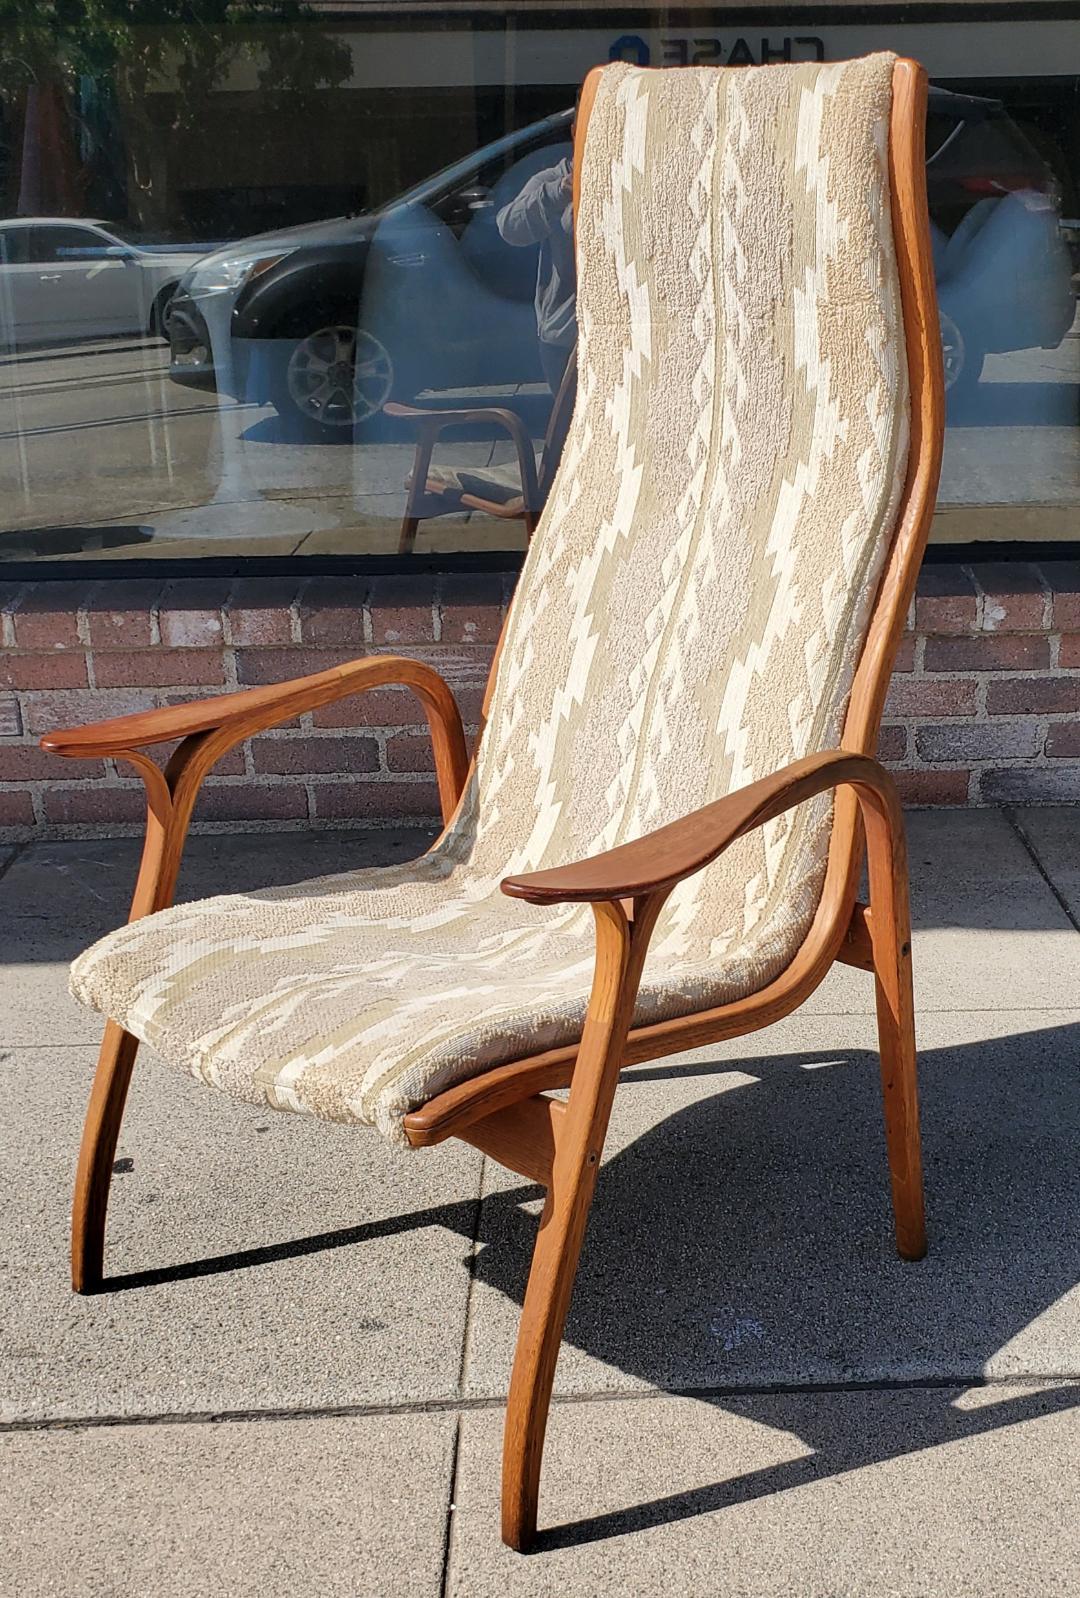 1960s Yngve Ekström Lamino chair for Swedese Scandinavian Modern design is stamped, Made In Sweden.

A Scandinavian Modern
Design of the 1960s by Yngve Ekstrom is a comfortable lounge / easy chair. The 